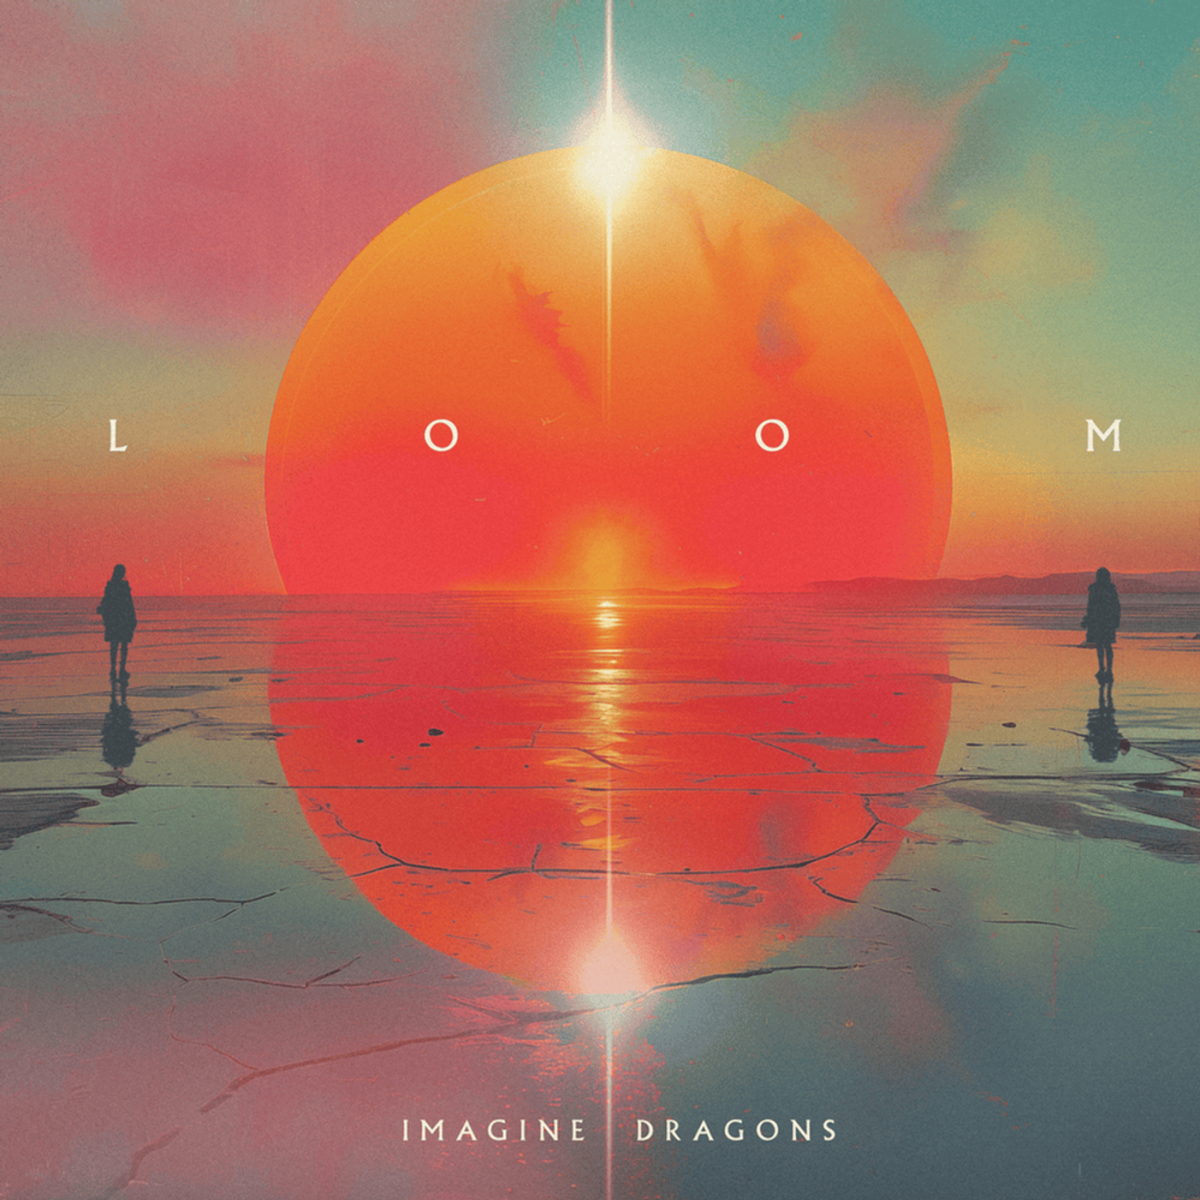 Loom+is+the+newest+album+from+technopop+group+Imagine+Dragon.+This+is+their+sixth+studio+album.